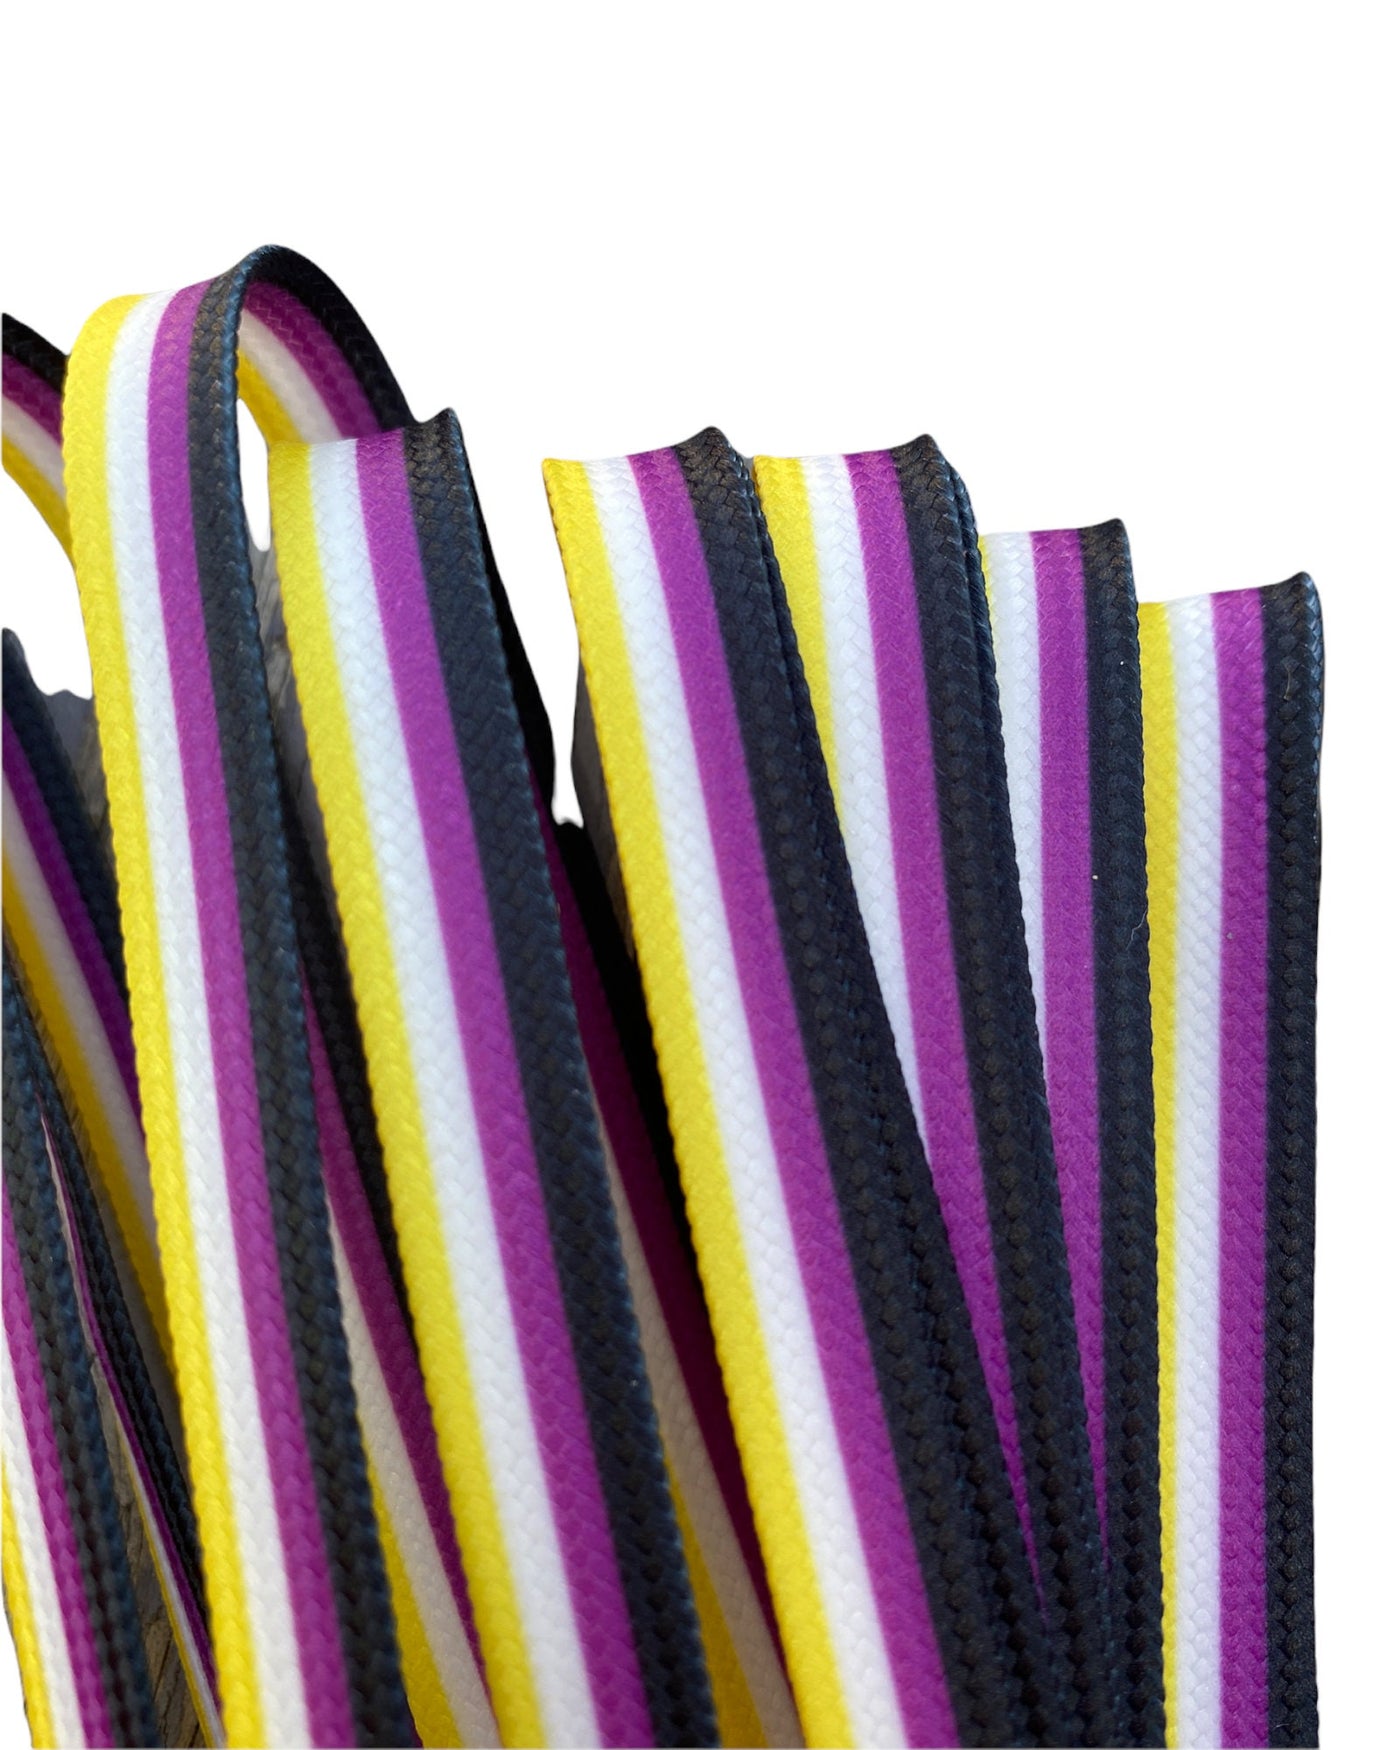 Non Binary Pride Stripe Laces – 96 inch STYLE Waxed Roller Skate Laces - black, purple, white and yellow  stripes -Nonbinary Flag